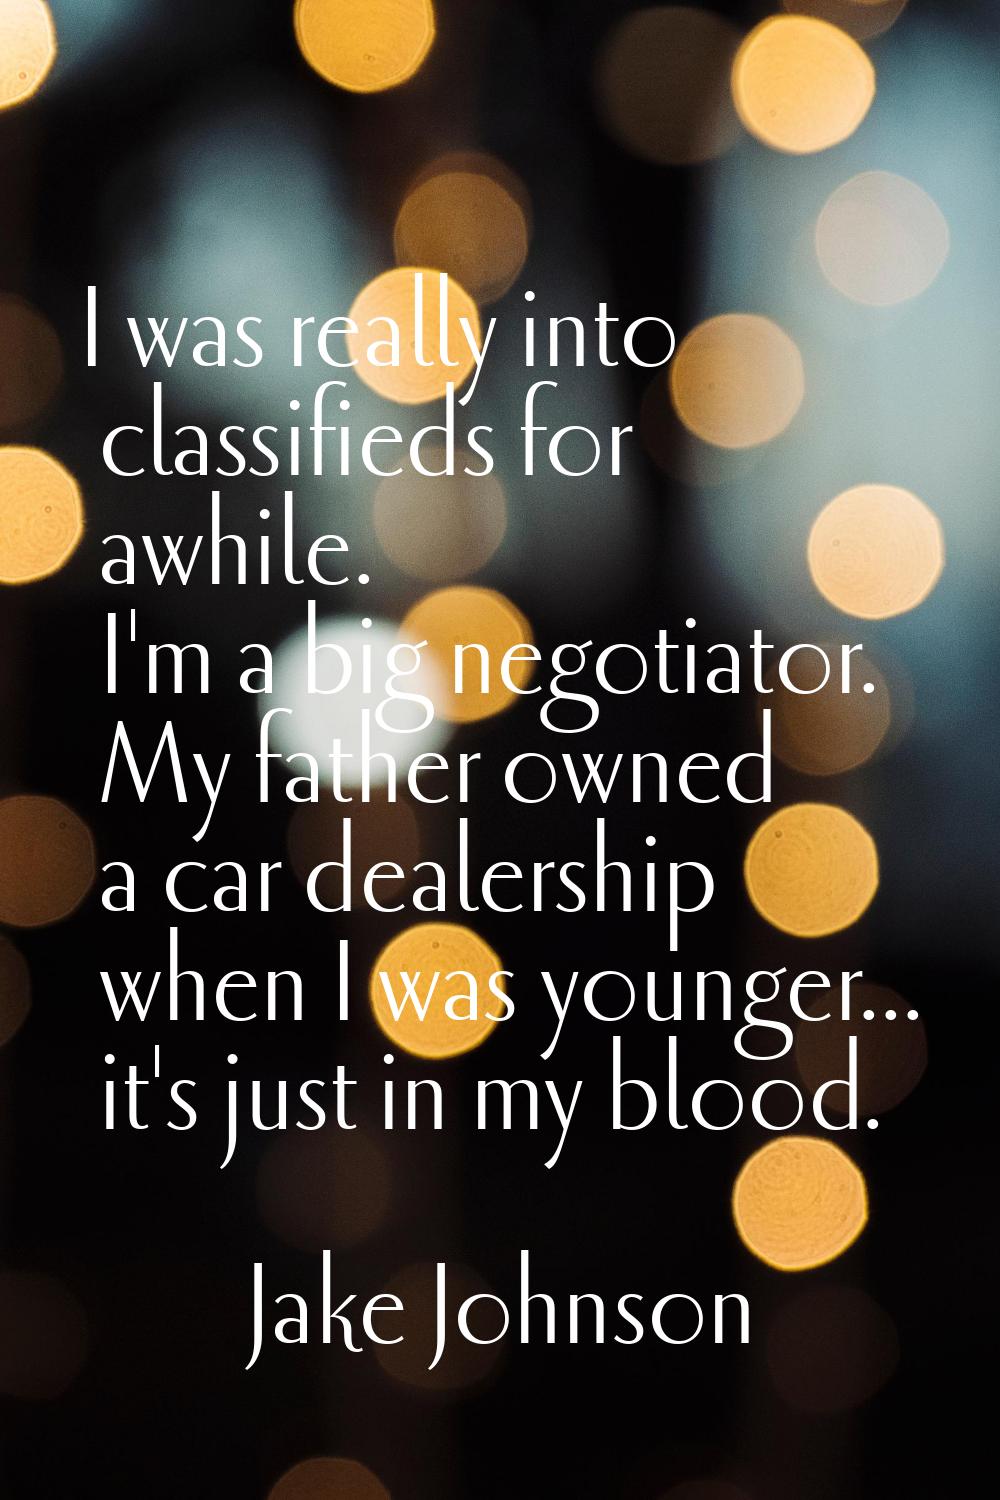 I was really into classifieds for awhile. I'm a big negotiator. My father owned a car dealership wh